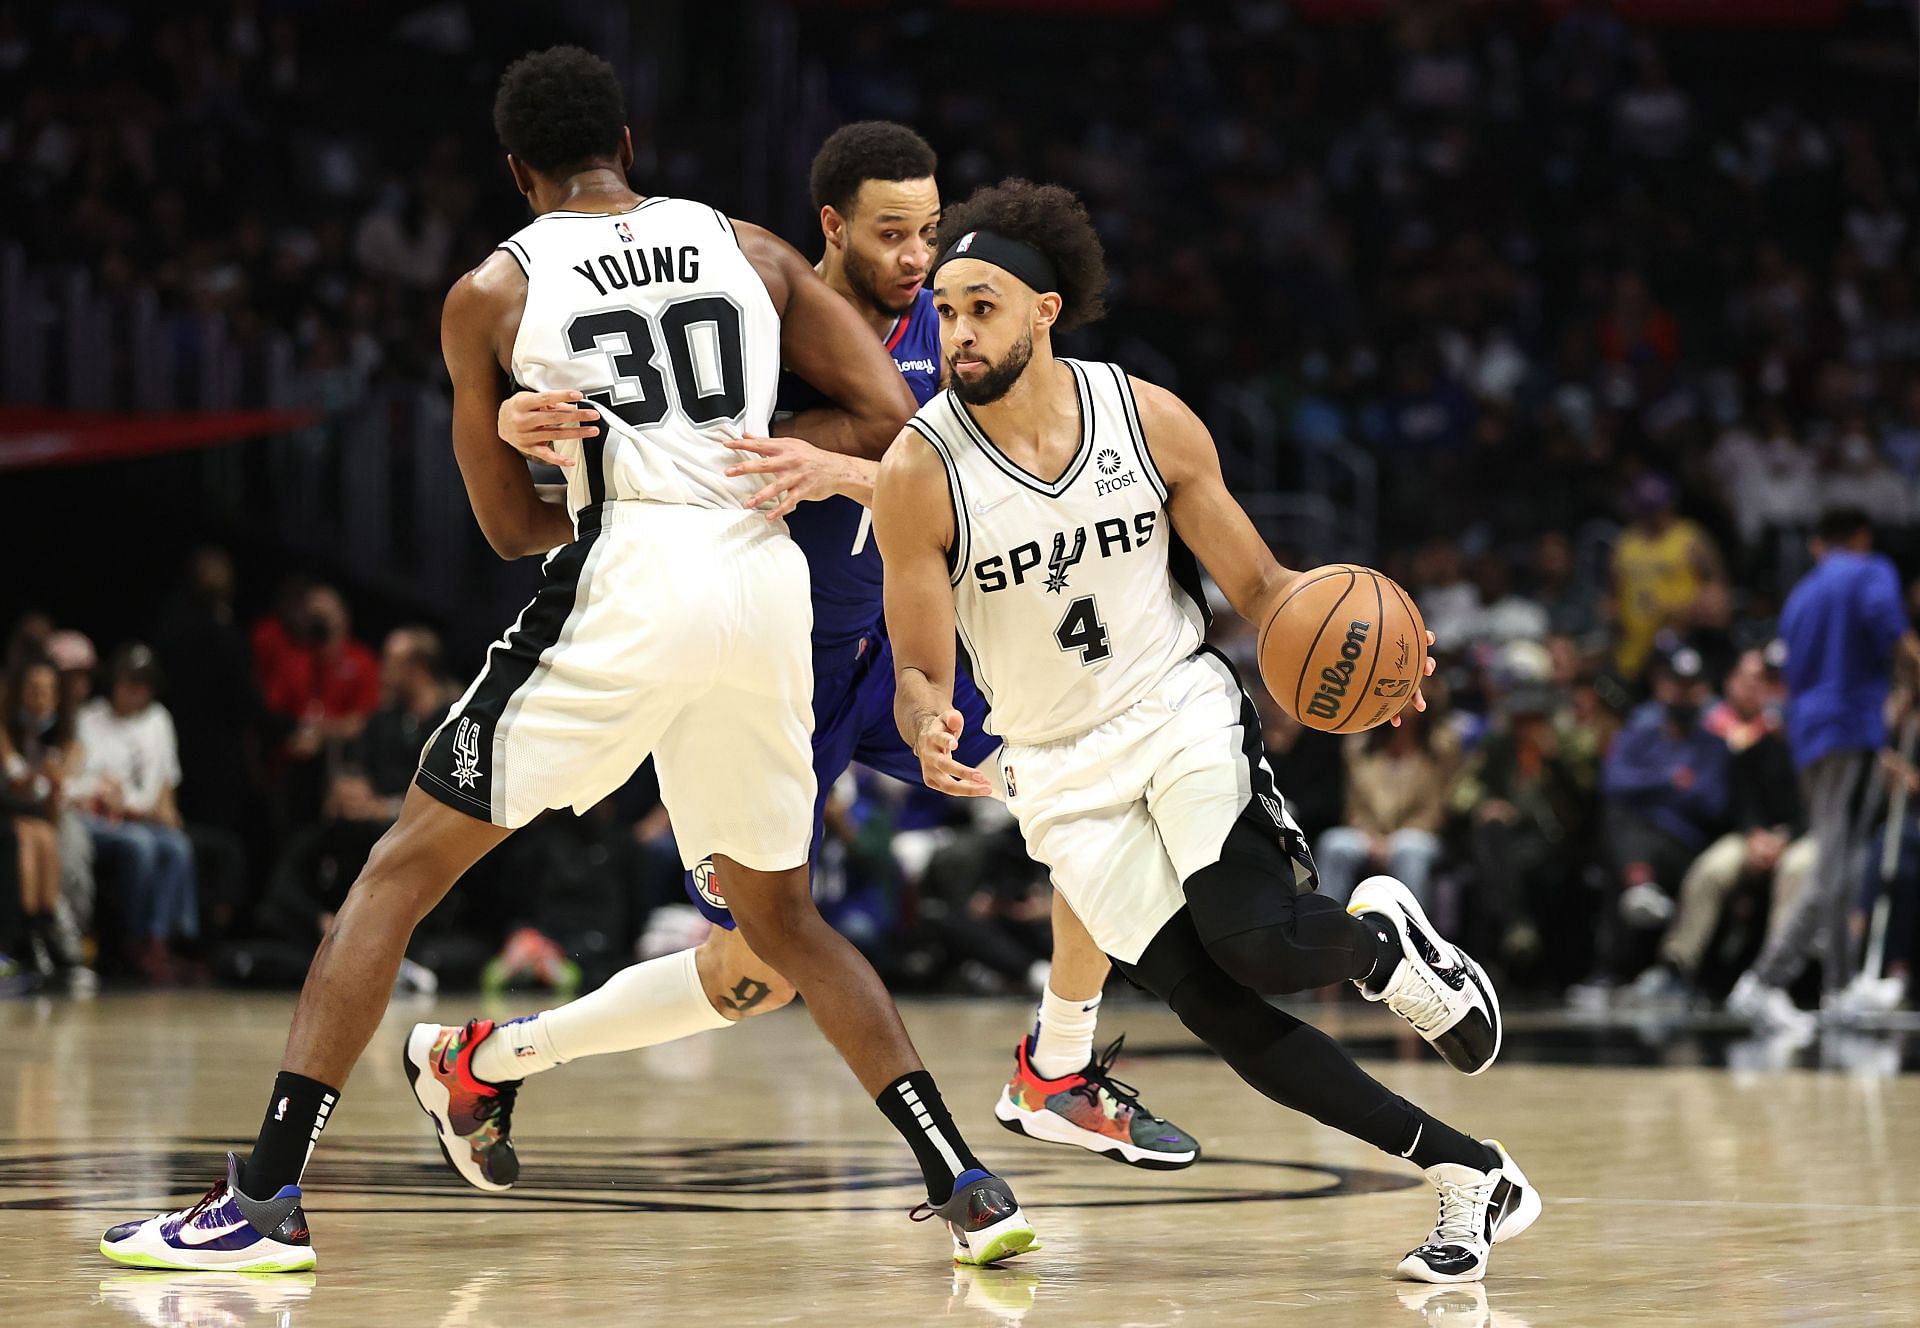 Derrick White of the Spurs